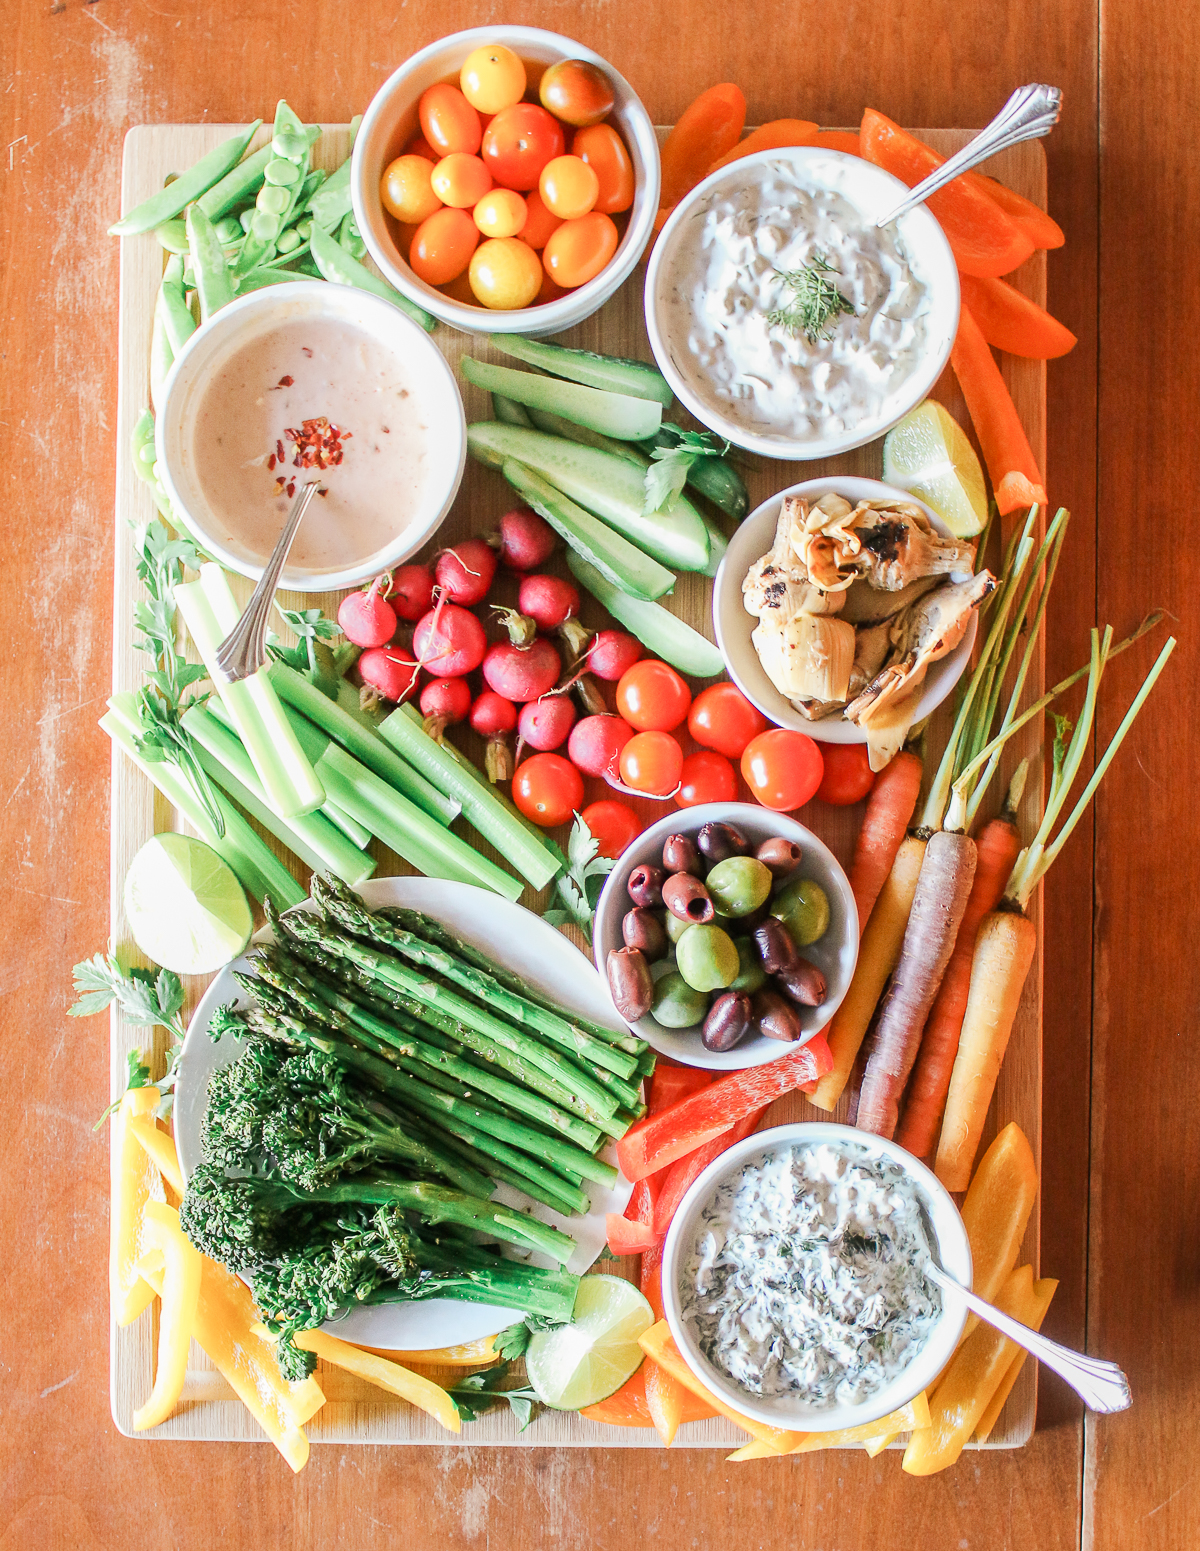 Holiday Hostess Hacks: Guide to the Ultimate Vegetables Crudites Platter by southern lifestyle blogger Stephanie Ziajka from Diary of a Debutante, pretty crudite platter, Hellmann's organic mayonnaise recipes, fresh creamy spinach dip recipe, fresh buffalo dip recipe, fresh dill dip recipe, crudite dip recipes